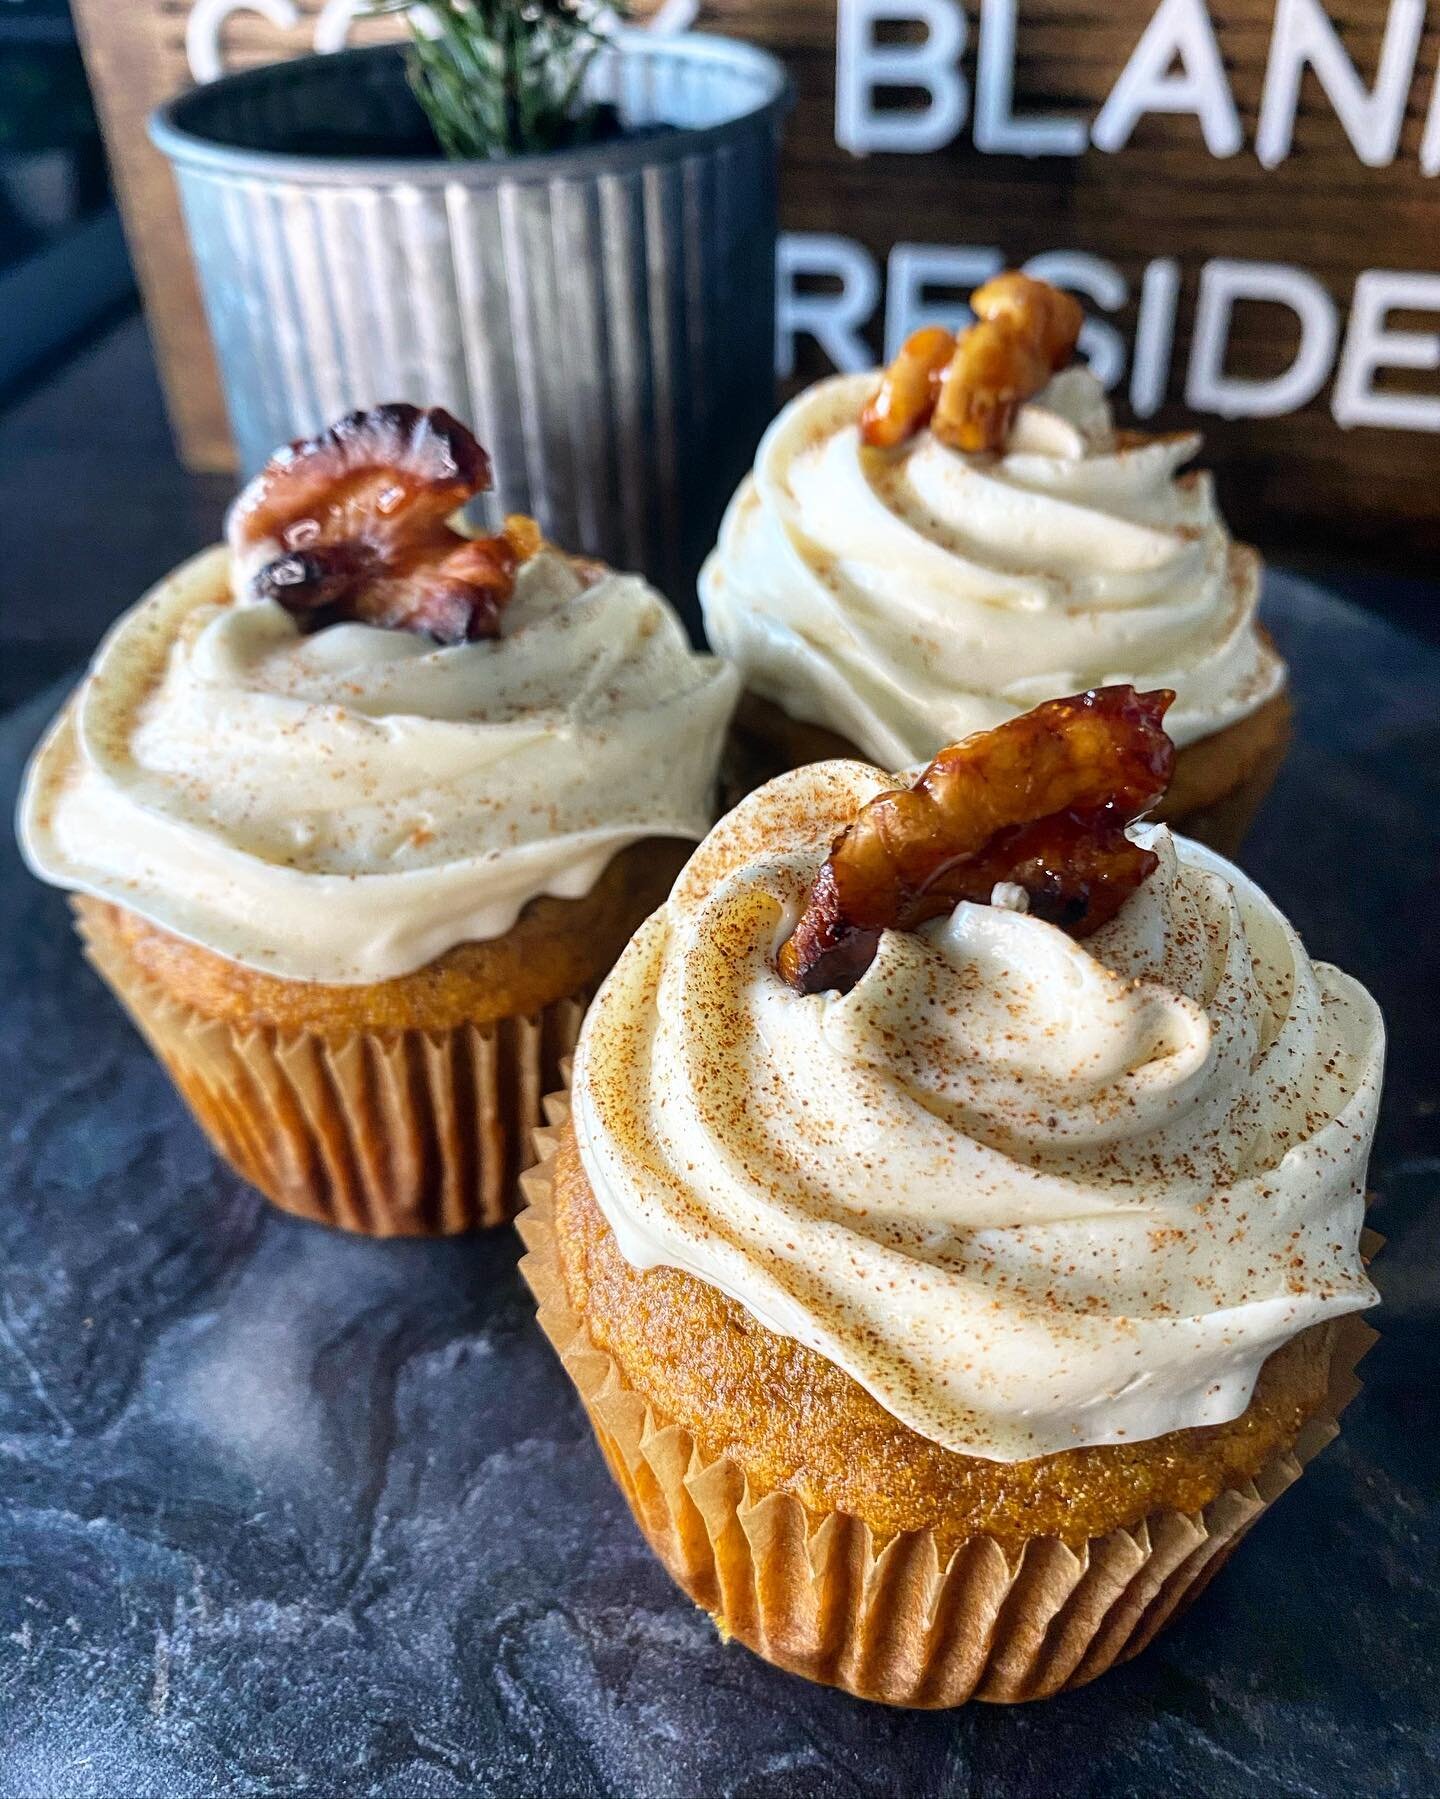 Next week we will be offering our Pumpkin Cupcakes with Cream Cheese frosting! This will definitely fulfill your pumpkin spice craving 😋 These cupcakes are made with real pumpkin and topped with our homemade cinnamon cream cheese frosting. Yumm!

 W